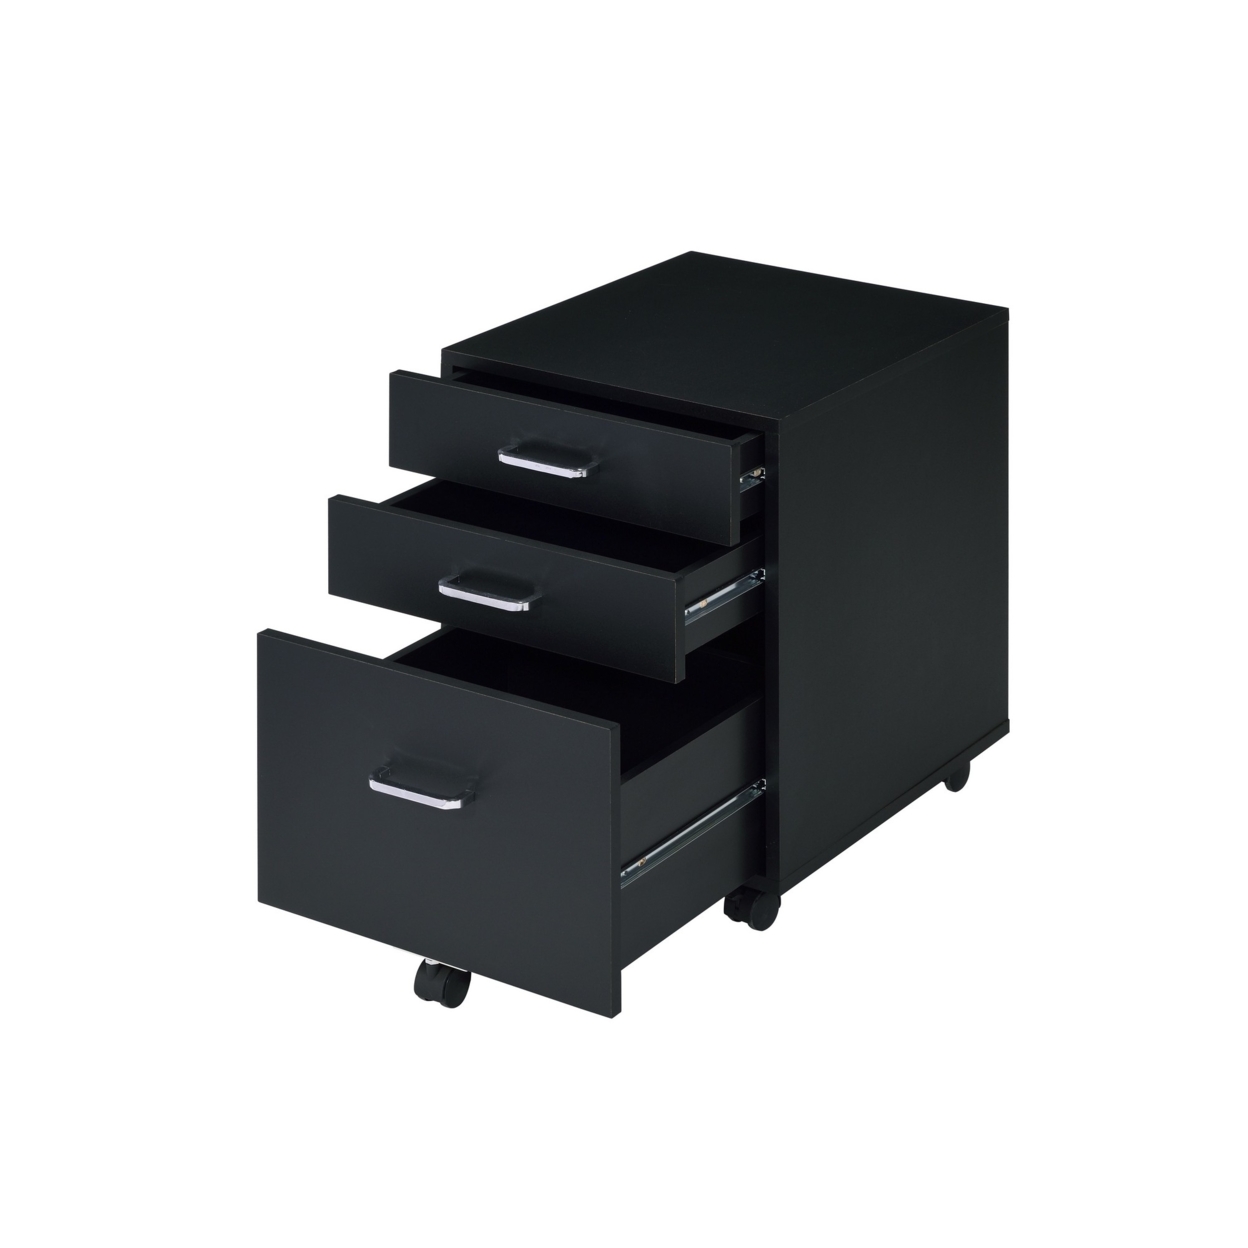 Cabinet With 3 Drawers And Wheels, Black- Saltoro Sherpi